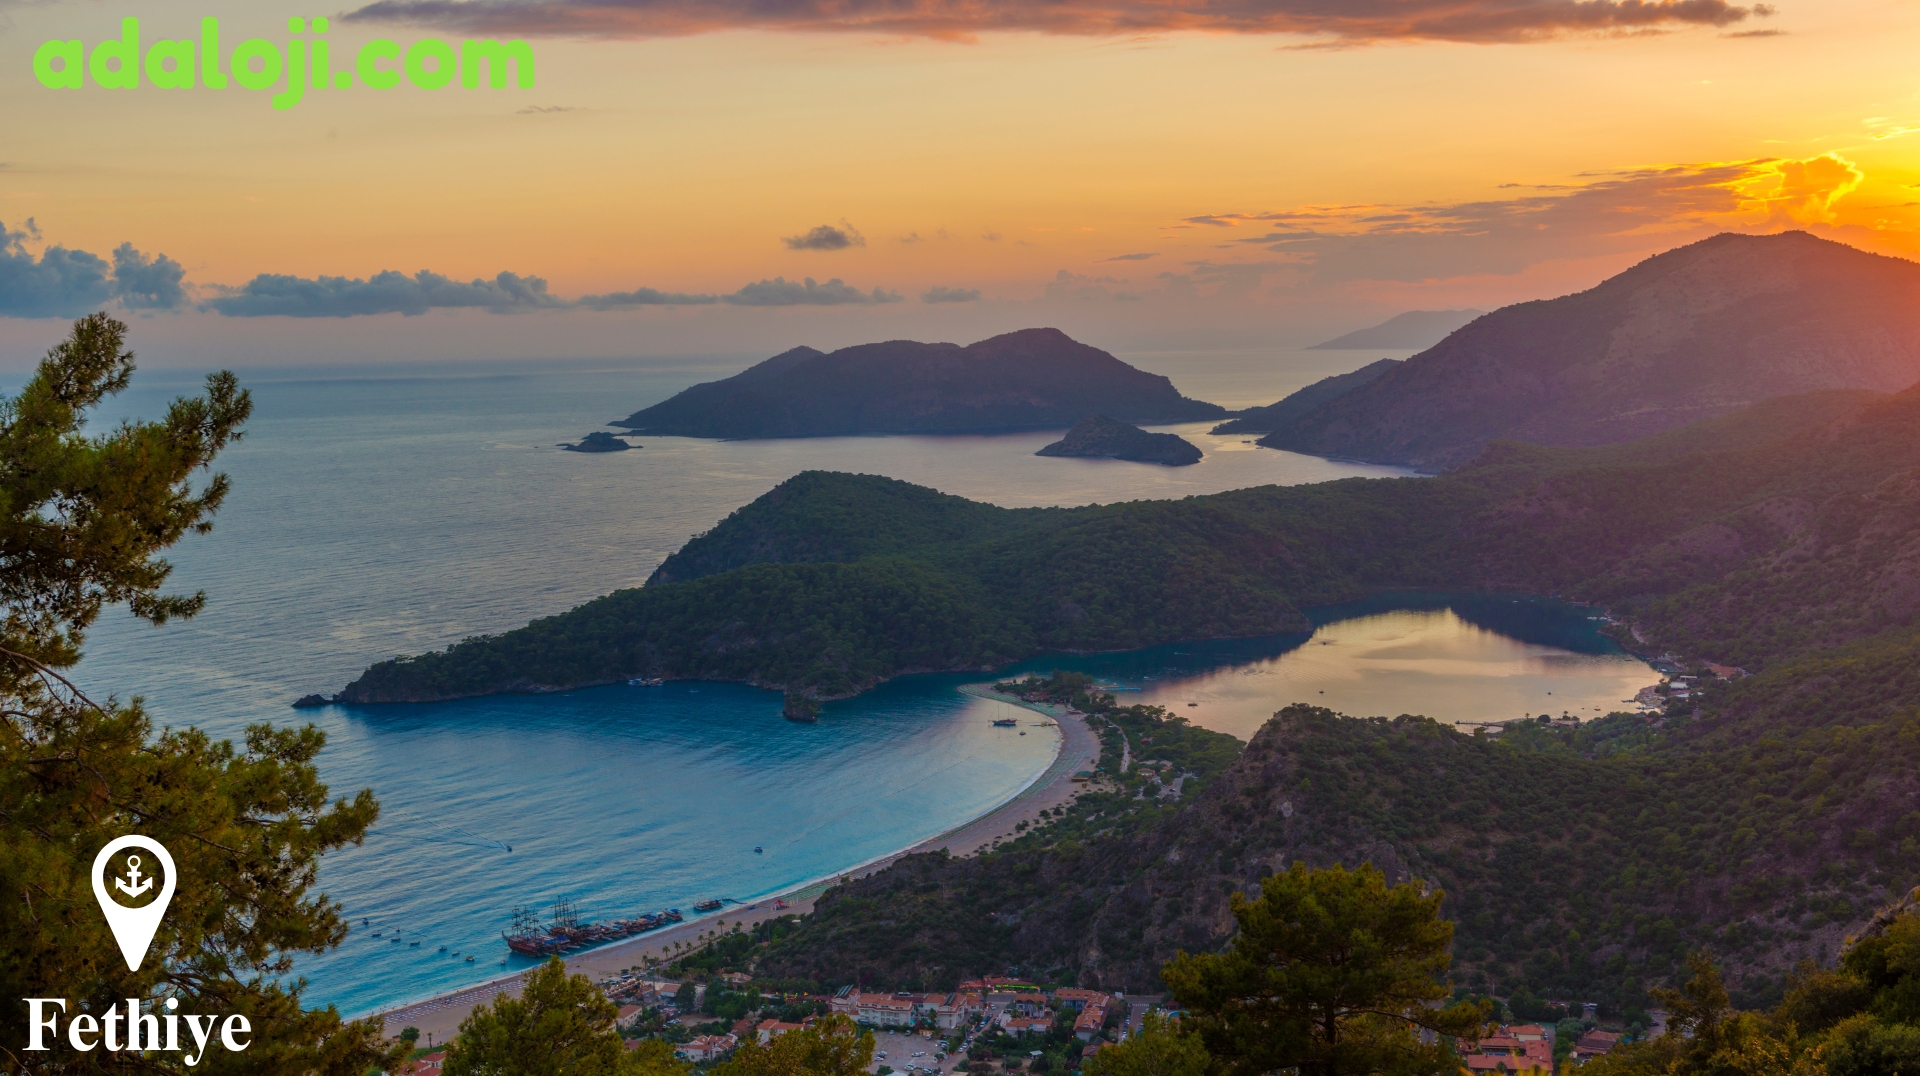 Fethiye - Your Gateway to the Aegean Sea.